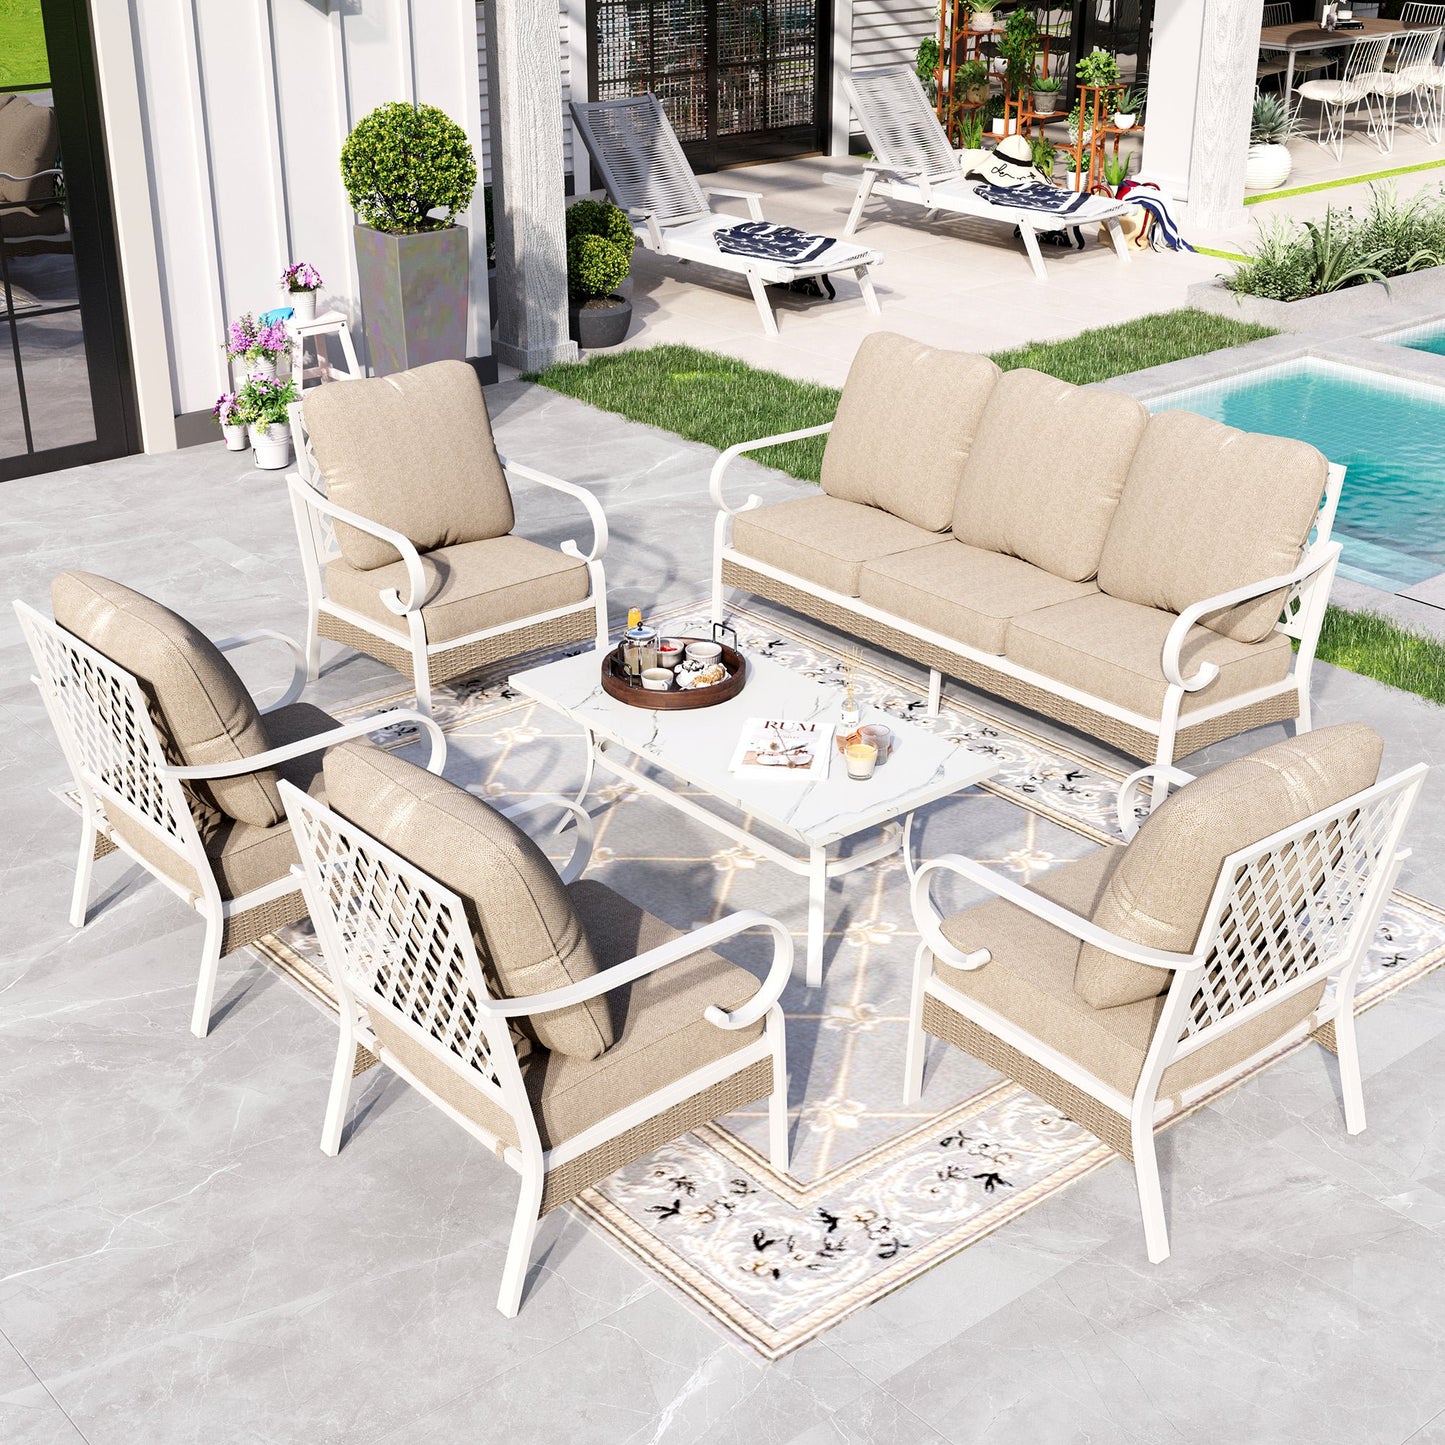 Sophia&William 6 Piece Patio Conversation Set Outdoor Furniture Sofa Set with Fixed Chair, Beige